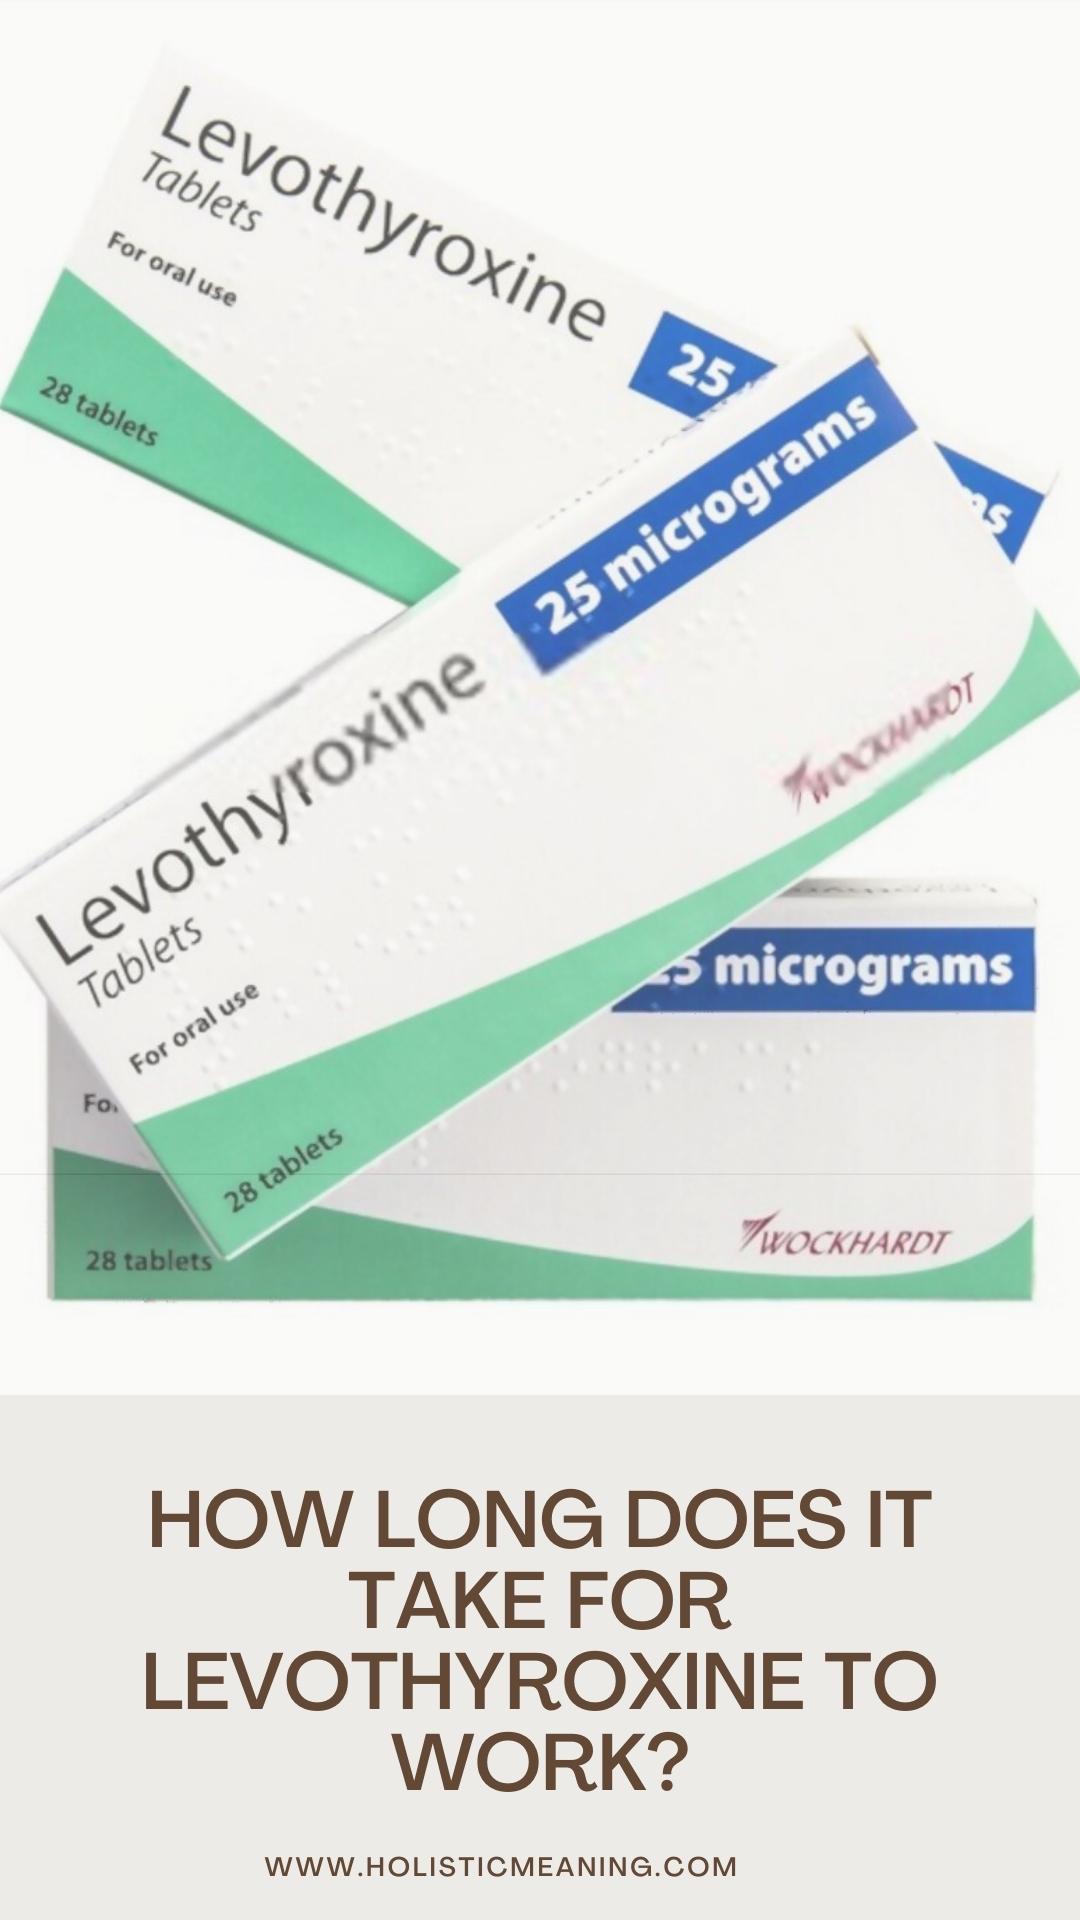 How Long Does It Take For Levothyroxine To Work?